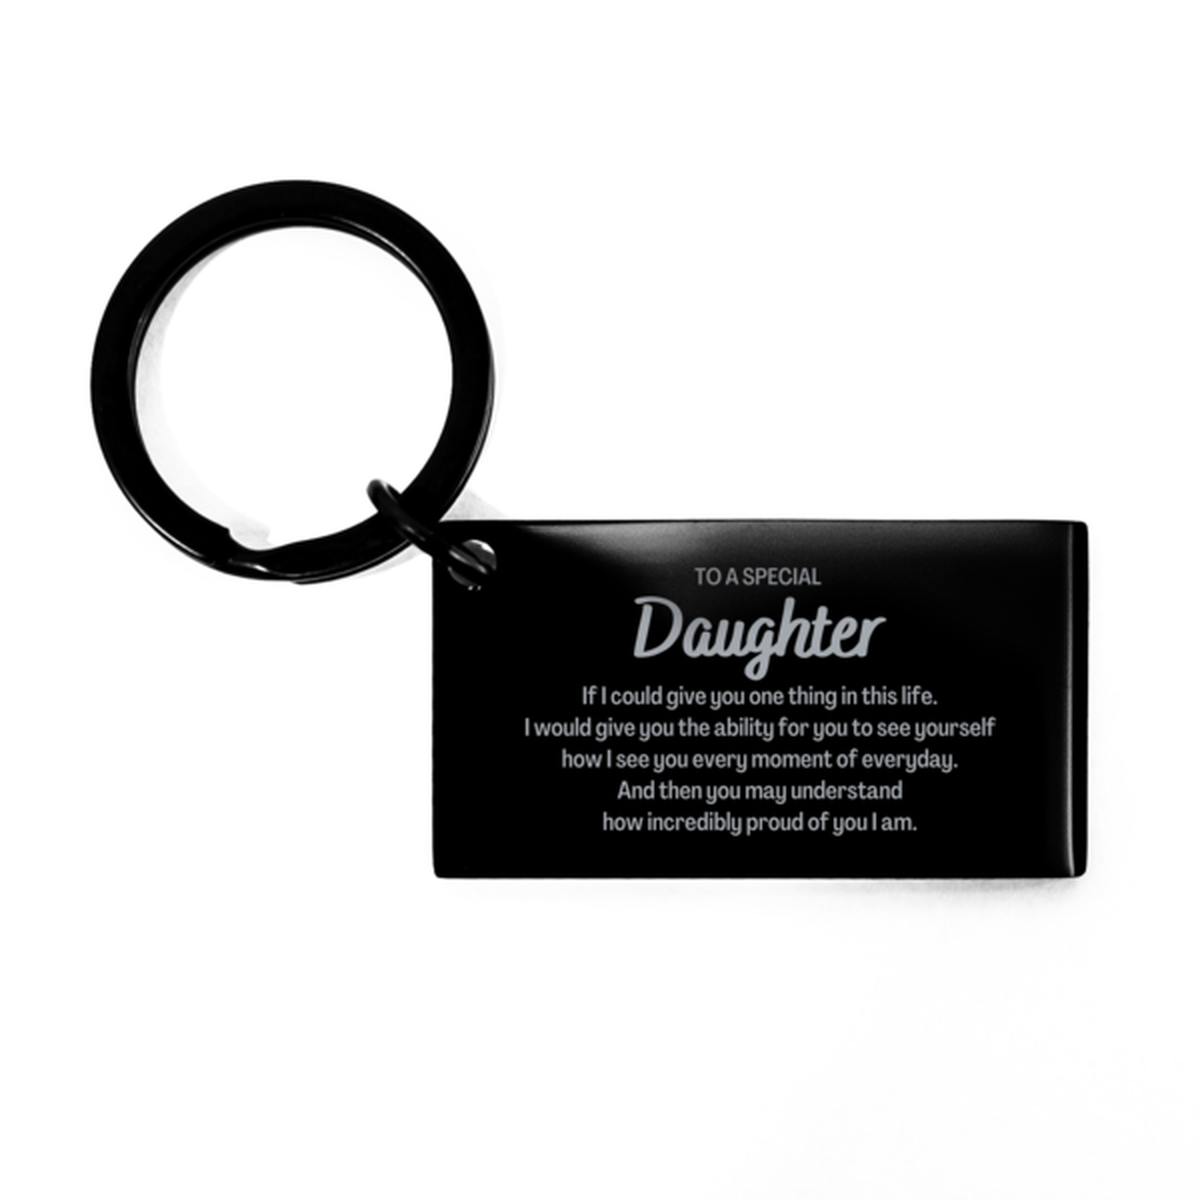 To My Daughter Keychain, Gifts For Daughter Engraved, Inspirational Gifts for Christmas Birthday, Epic Gifts for Daughter To A Special Daughter how incredibly proud of you I am